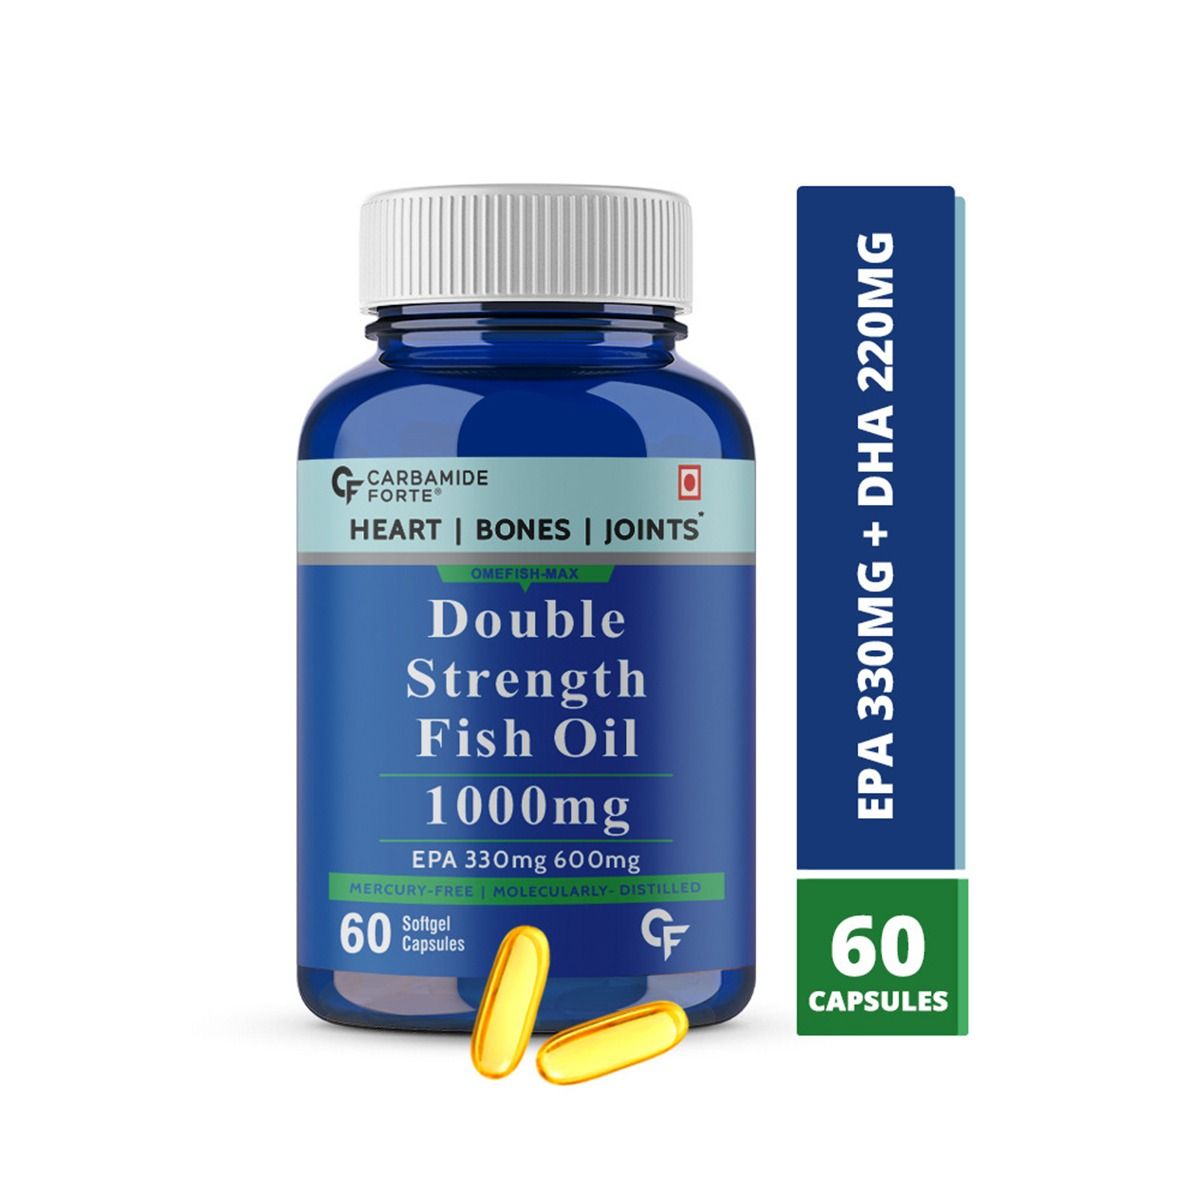 Carbamide Forte Double Strength Fish Oil 1000mg Omega-3 600mg Softgel Capsules, 60 Count, Pack of 1 